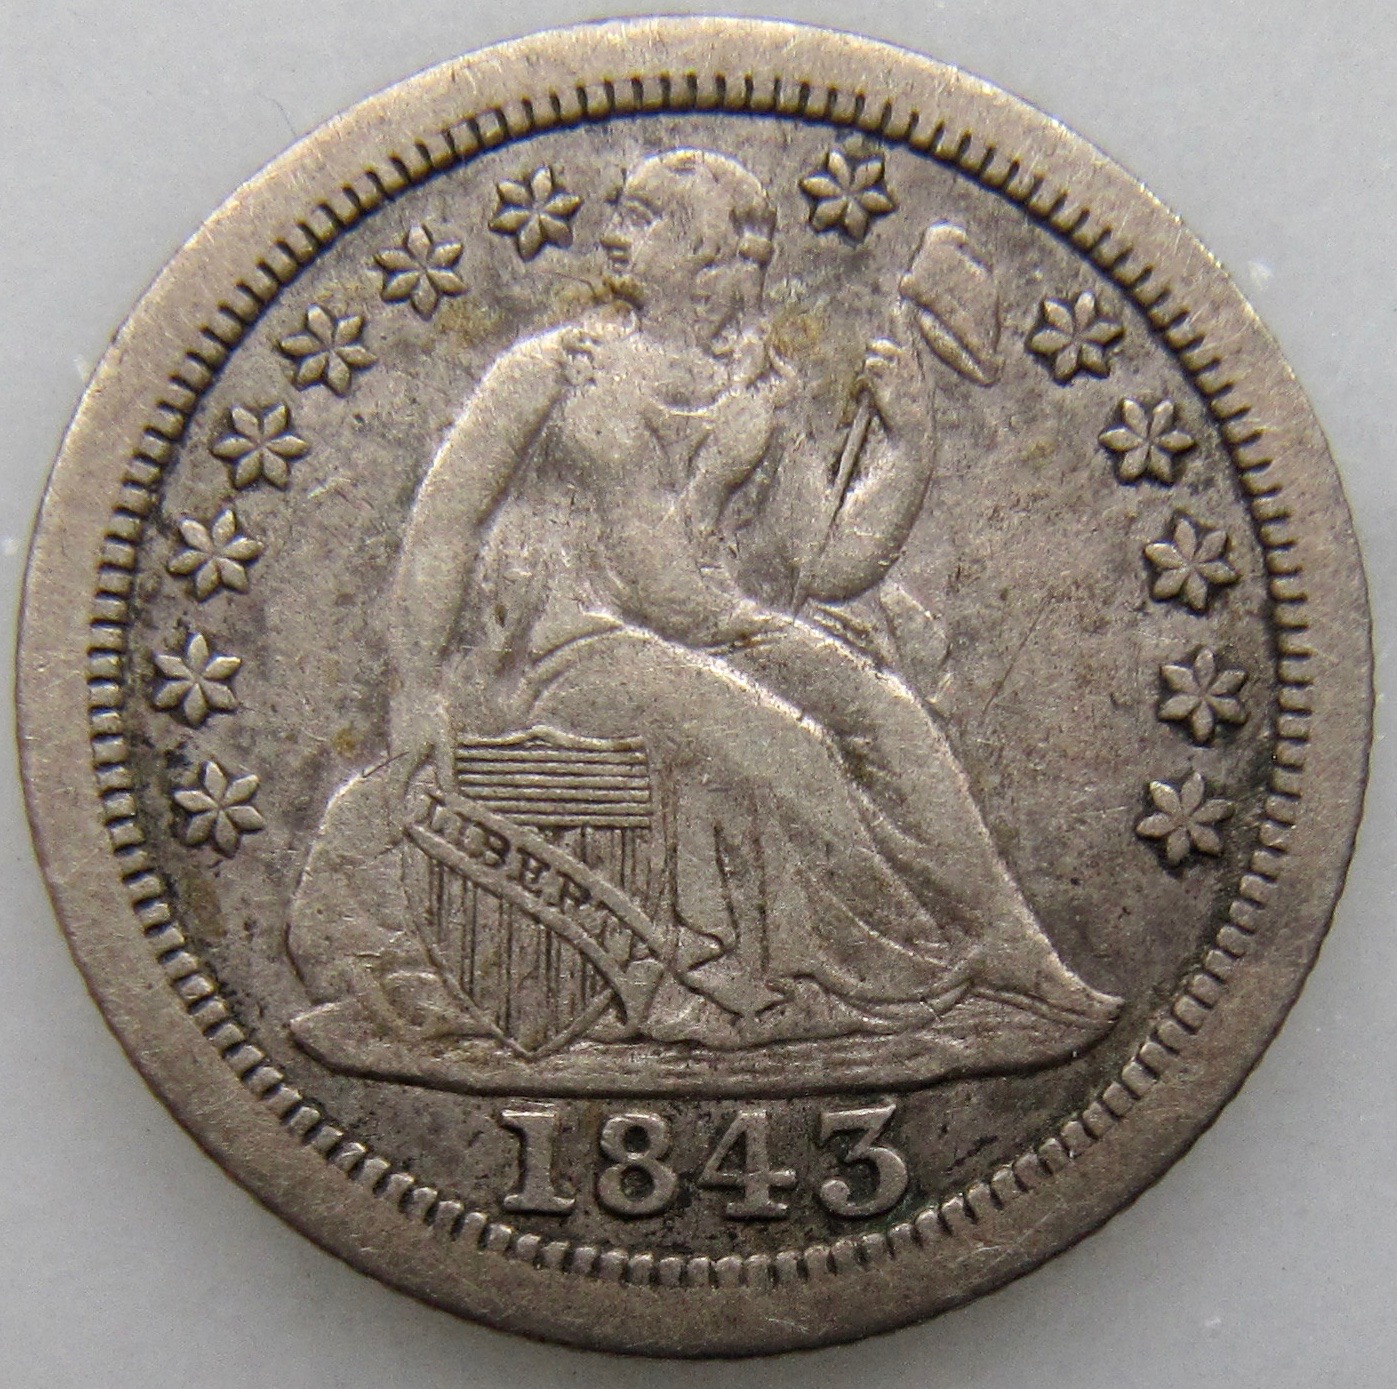 1843-O Dime - OBVXX N- BEST most correct picture  VVVGP !.jpg